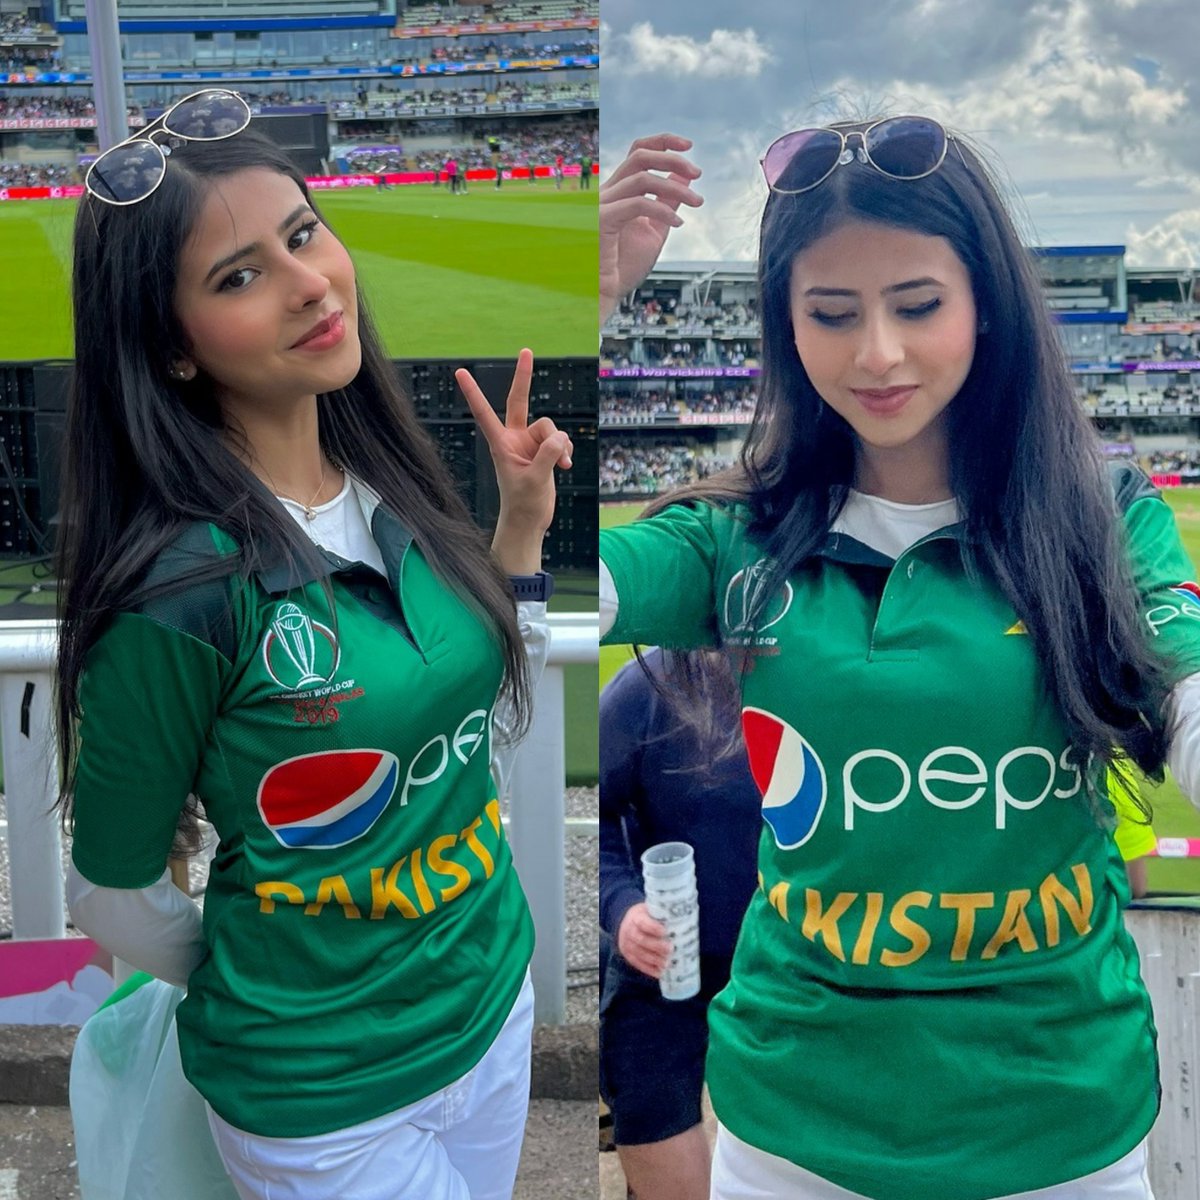 Meet the viral girl #NabeehaKhan a @babarazam258 fan who offered him a Mercedes car as a gift if he scores a ton against England - #PAKvENG #BabarAzam 💚🇵🇰